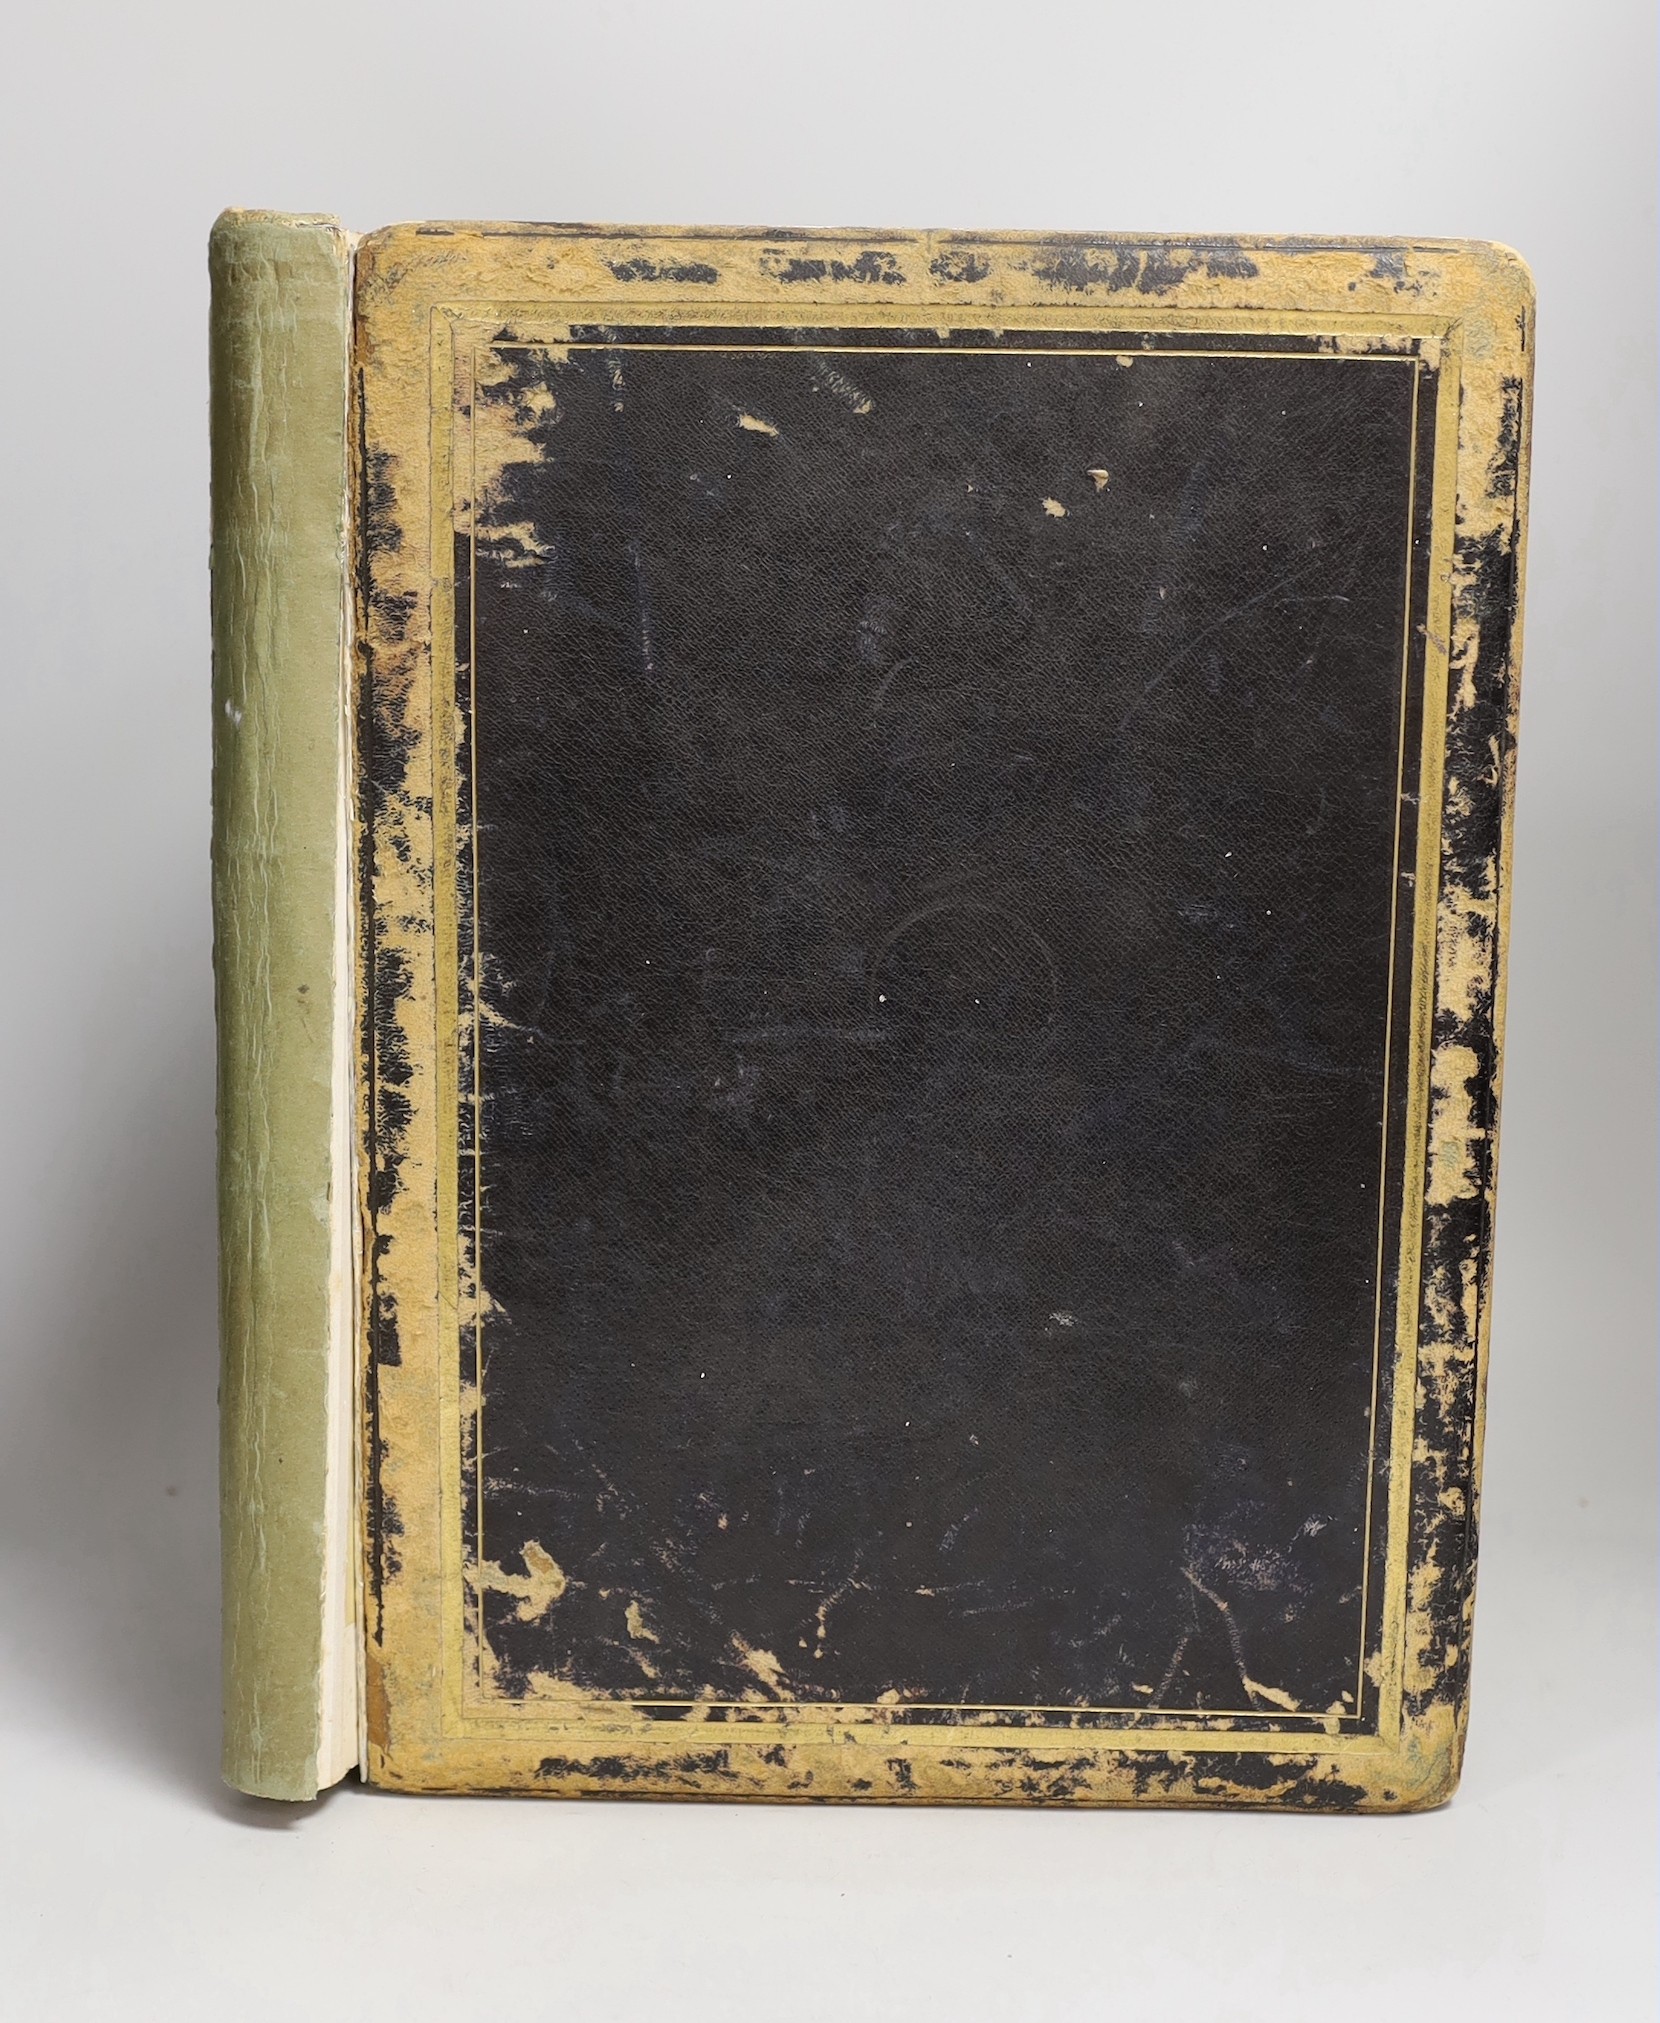 A photograph album, to contain religious and sacred sites throughout the United Kingdom, including Colchester, London, Bristol, etc.                                                                                        